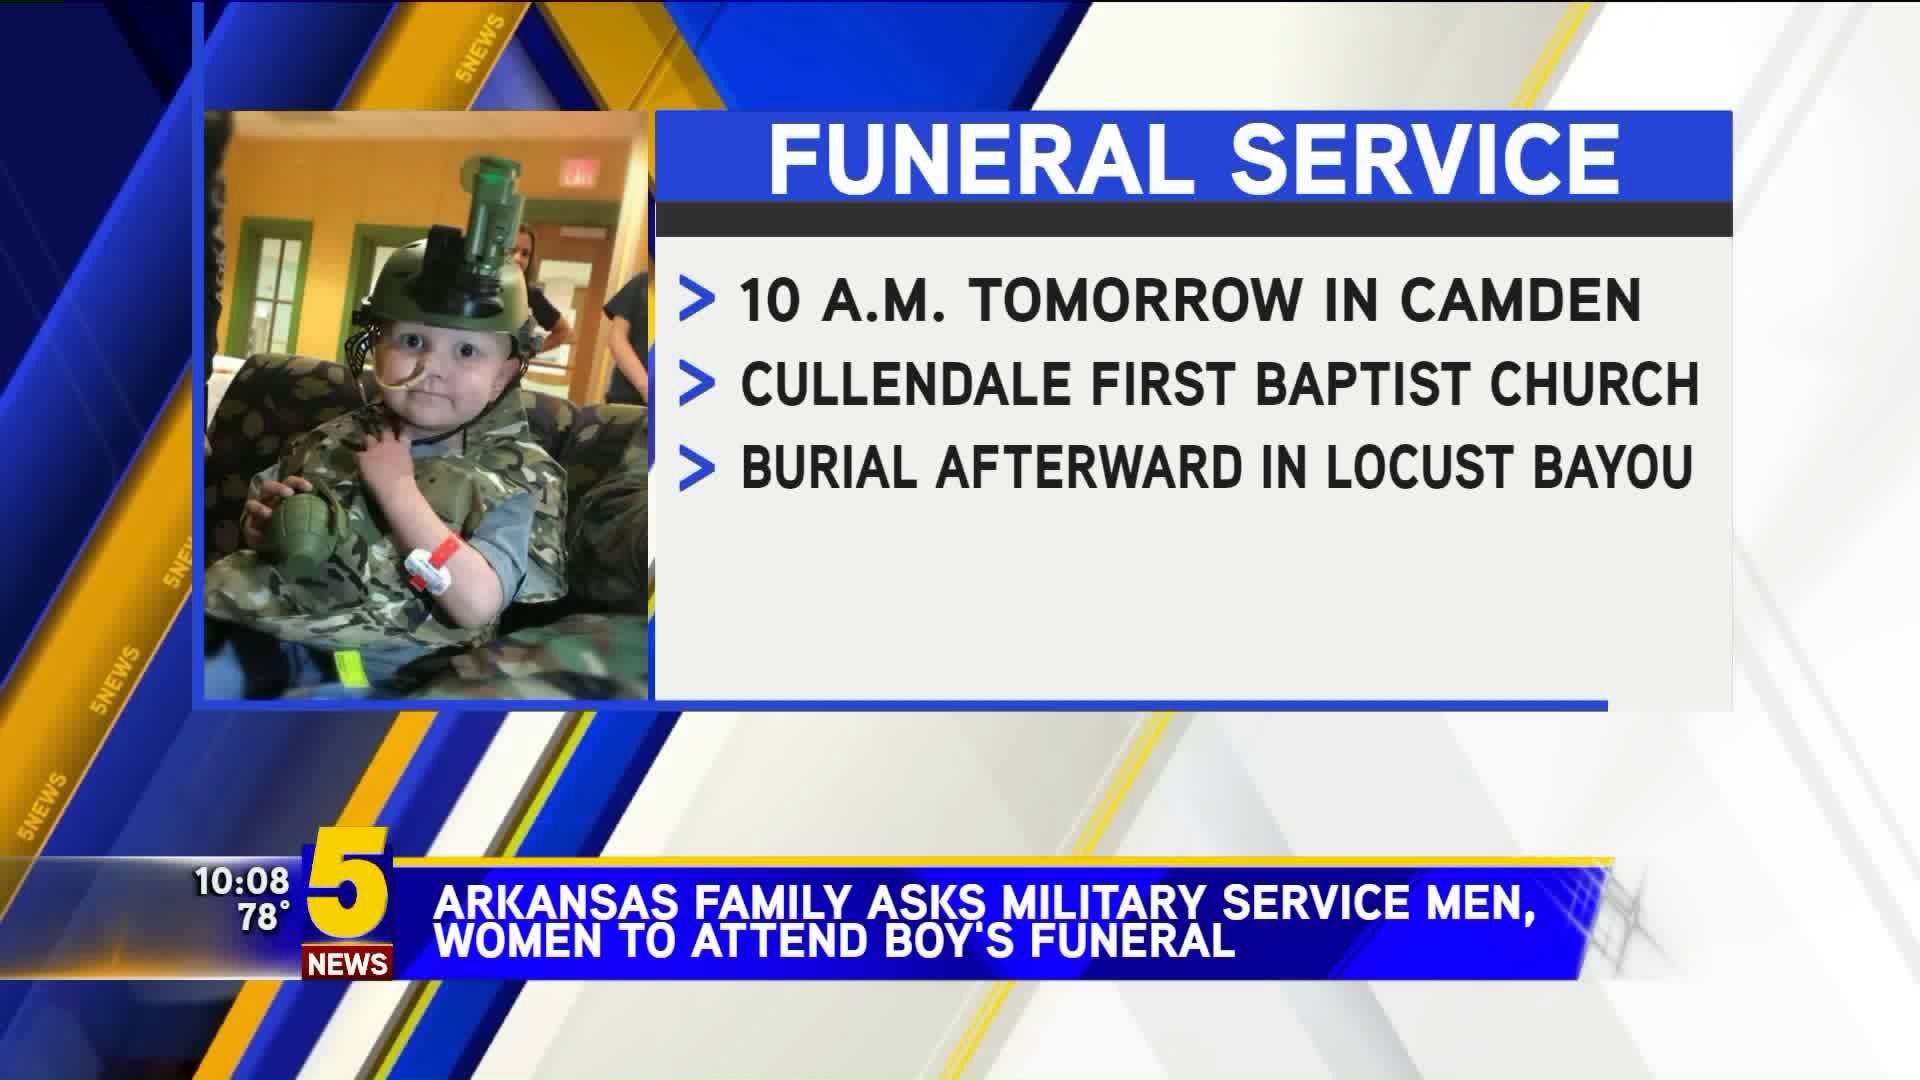 Arkansas Family Asks Soldiers To Attend Funeral for Boy Who Wanted To Be `Army Man`